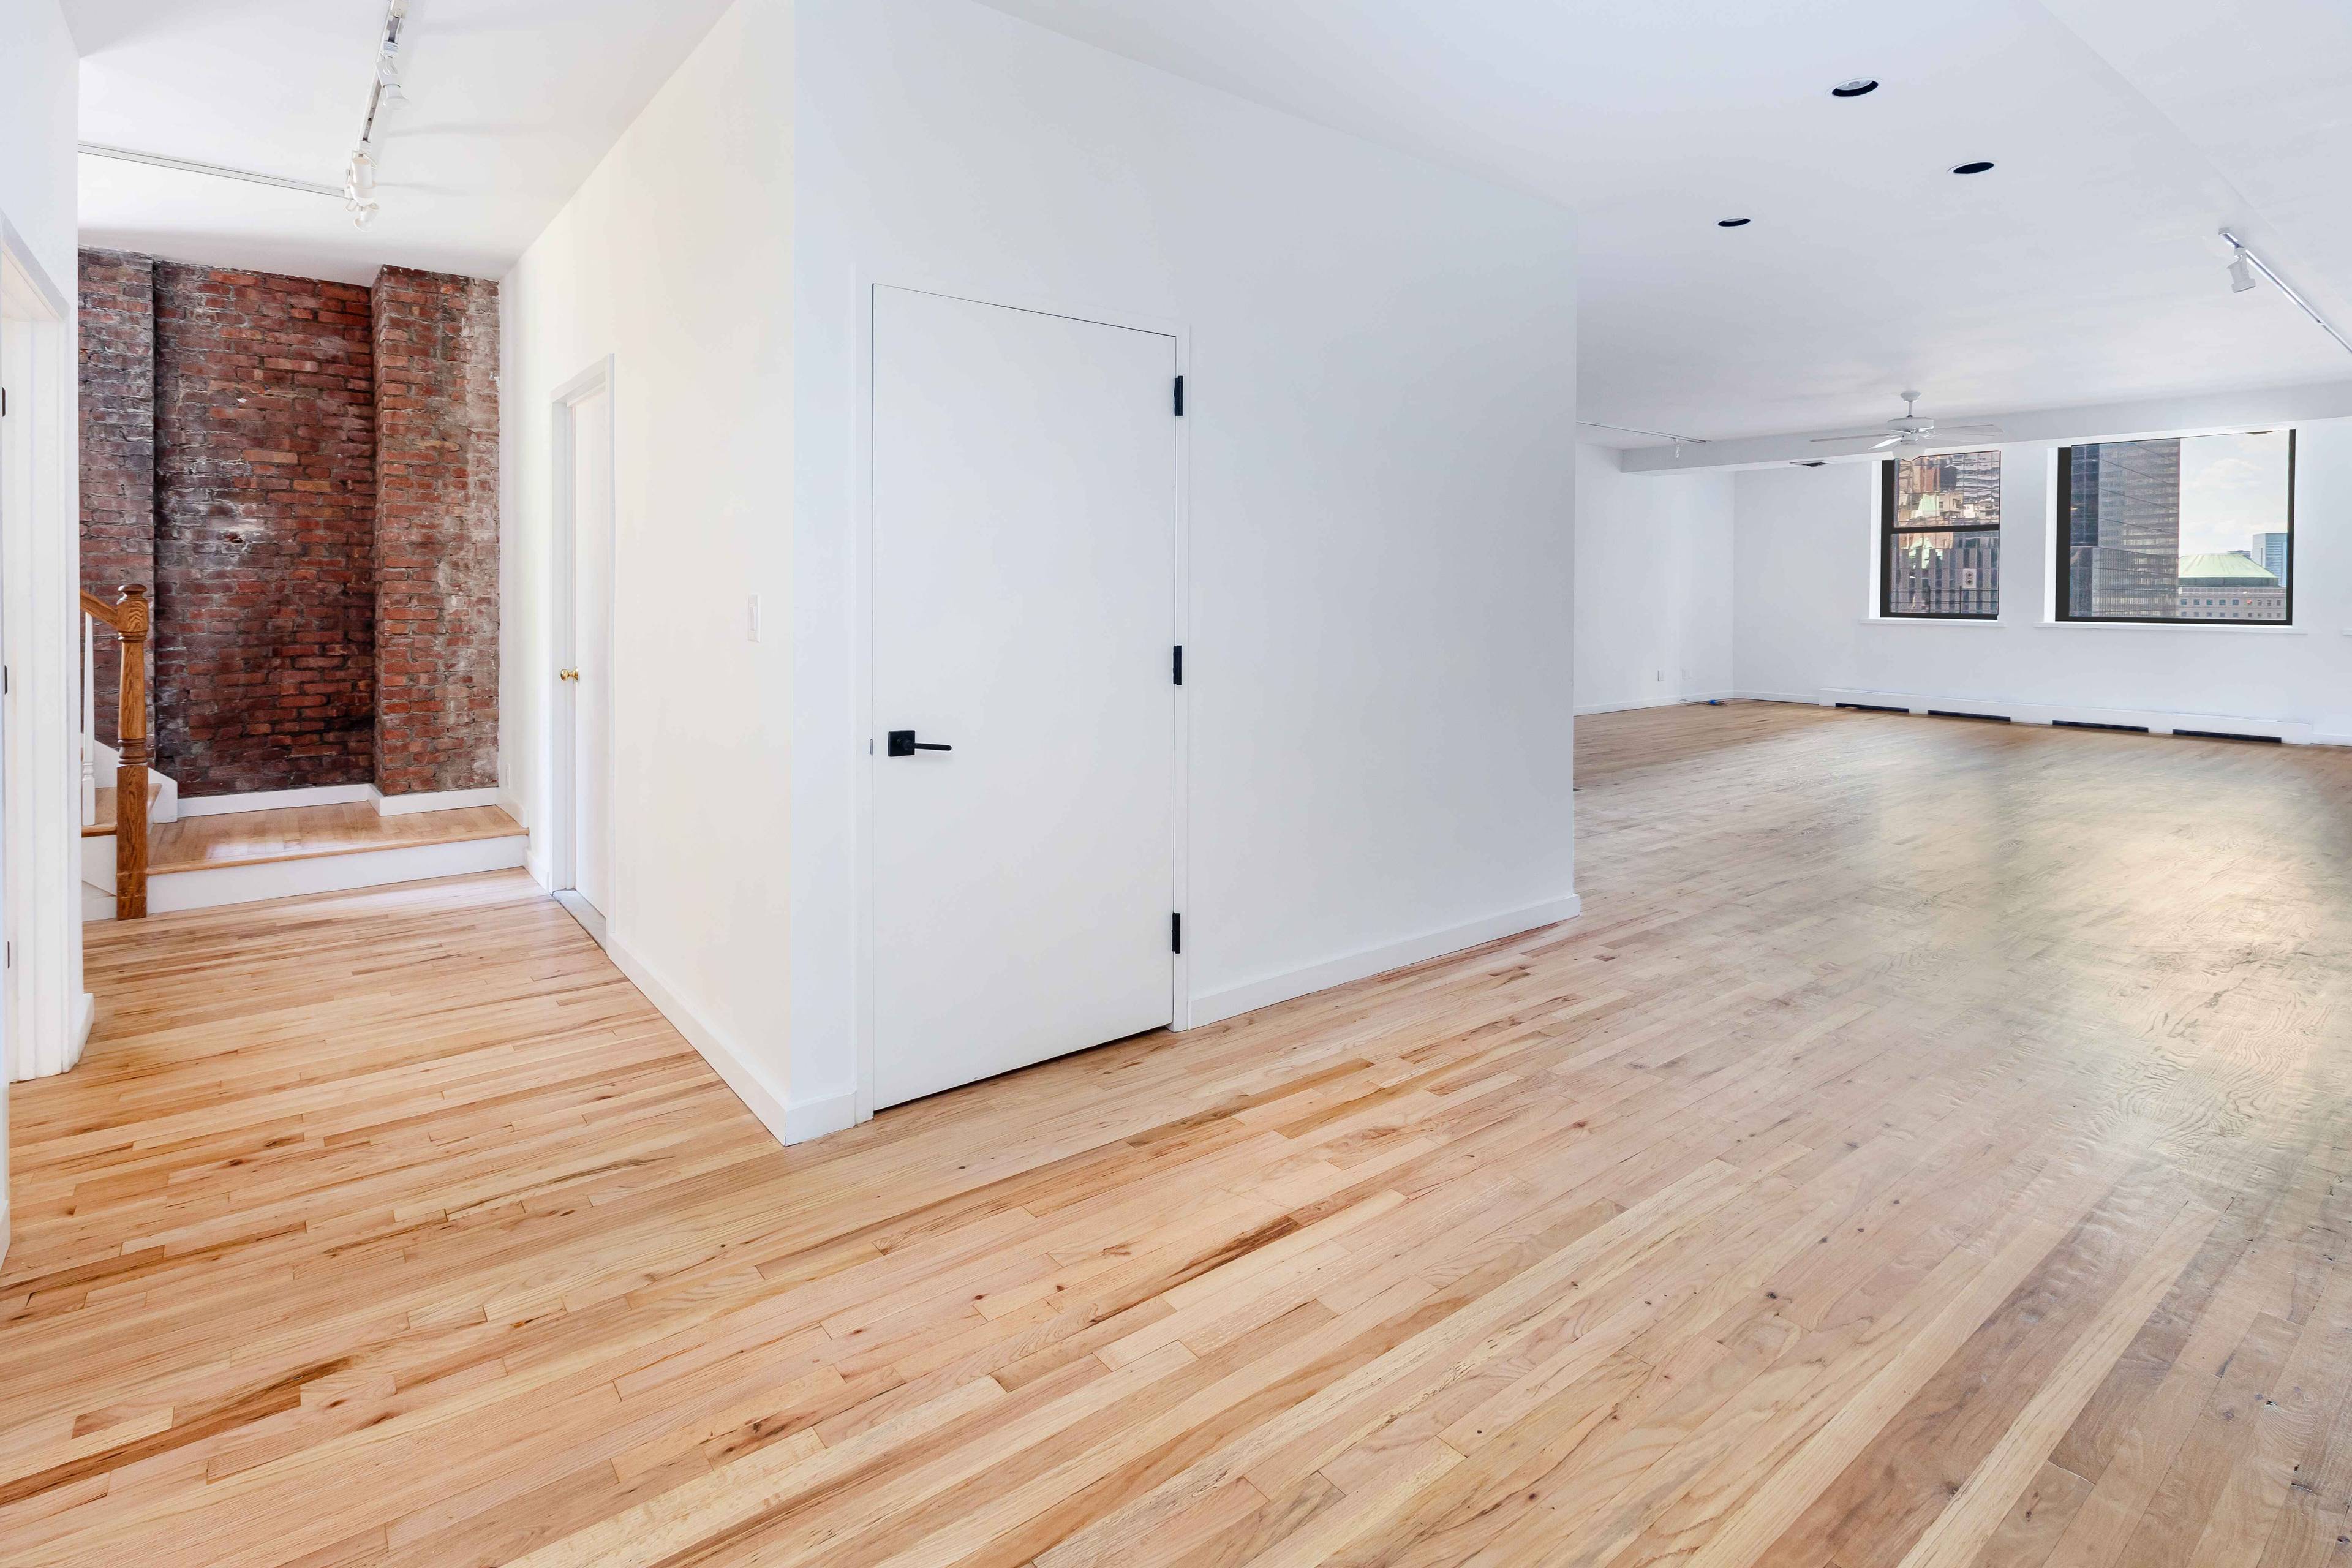 This timeless prewar loft in the heart of FiDi offers classic New York charm.